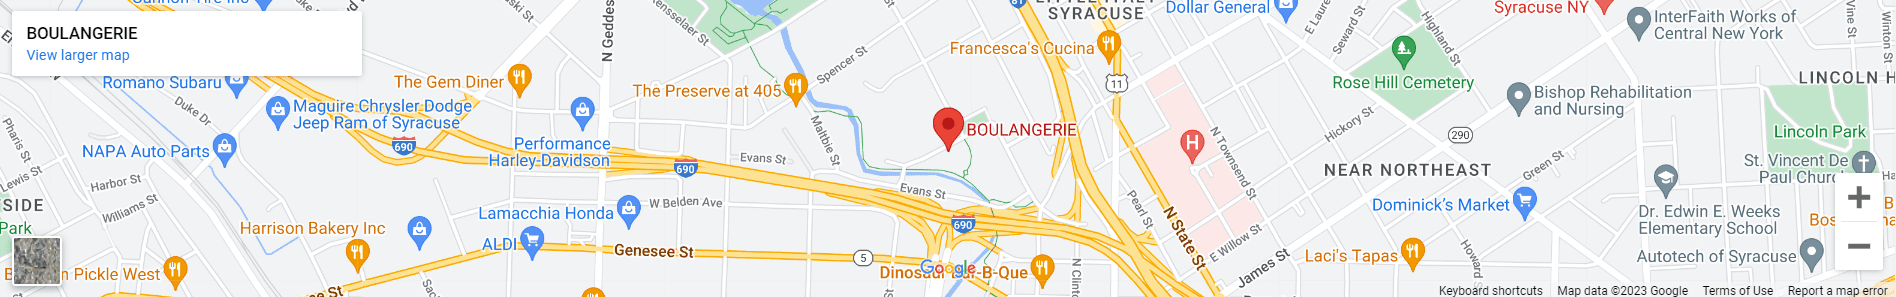 A map of the location of boulangerie